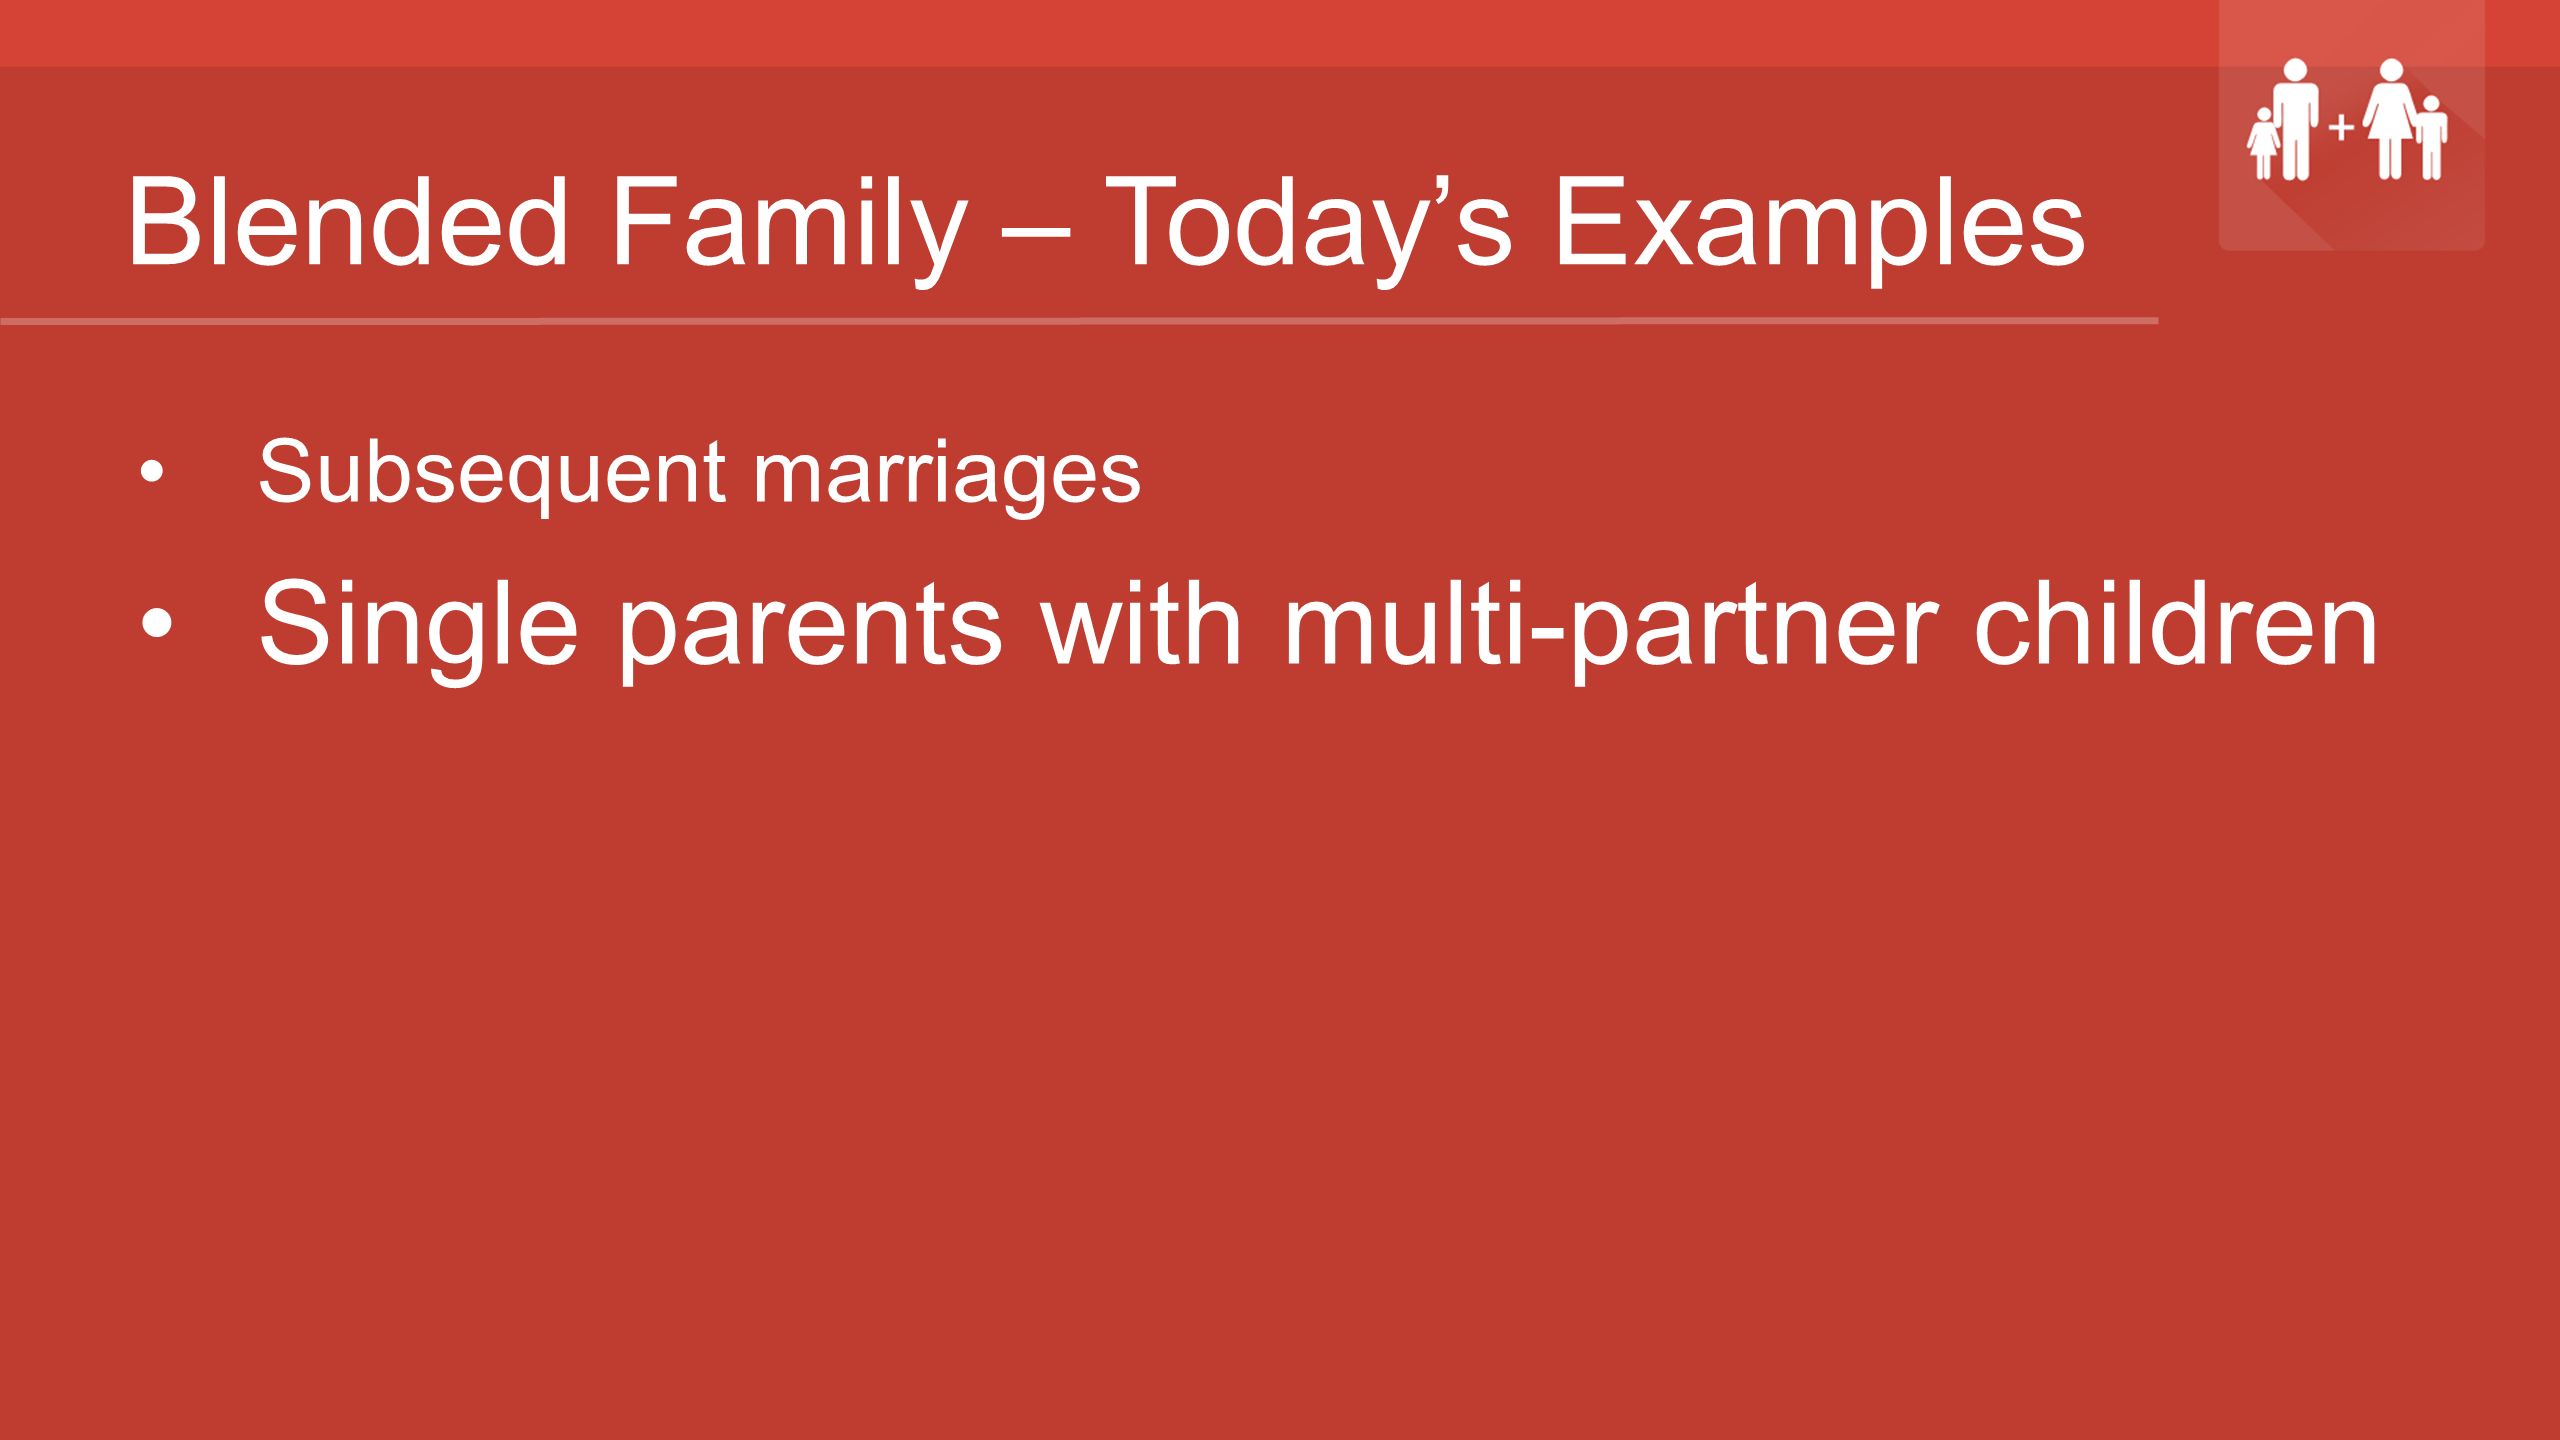 Blended Family – Today’s Examples Subsequent marriages Single parents with multi-partner children